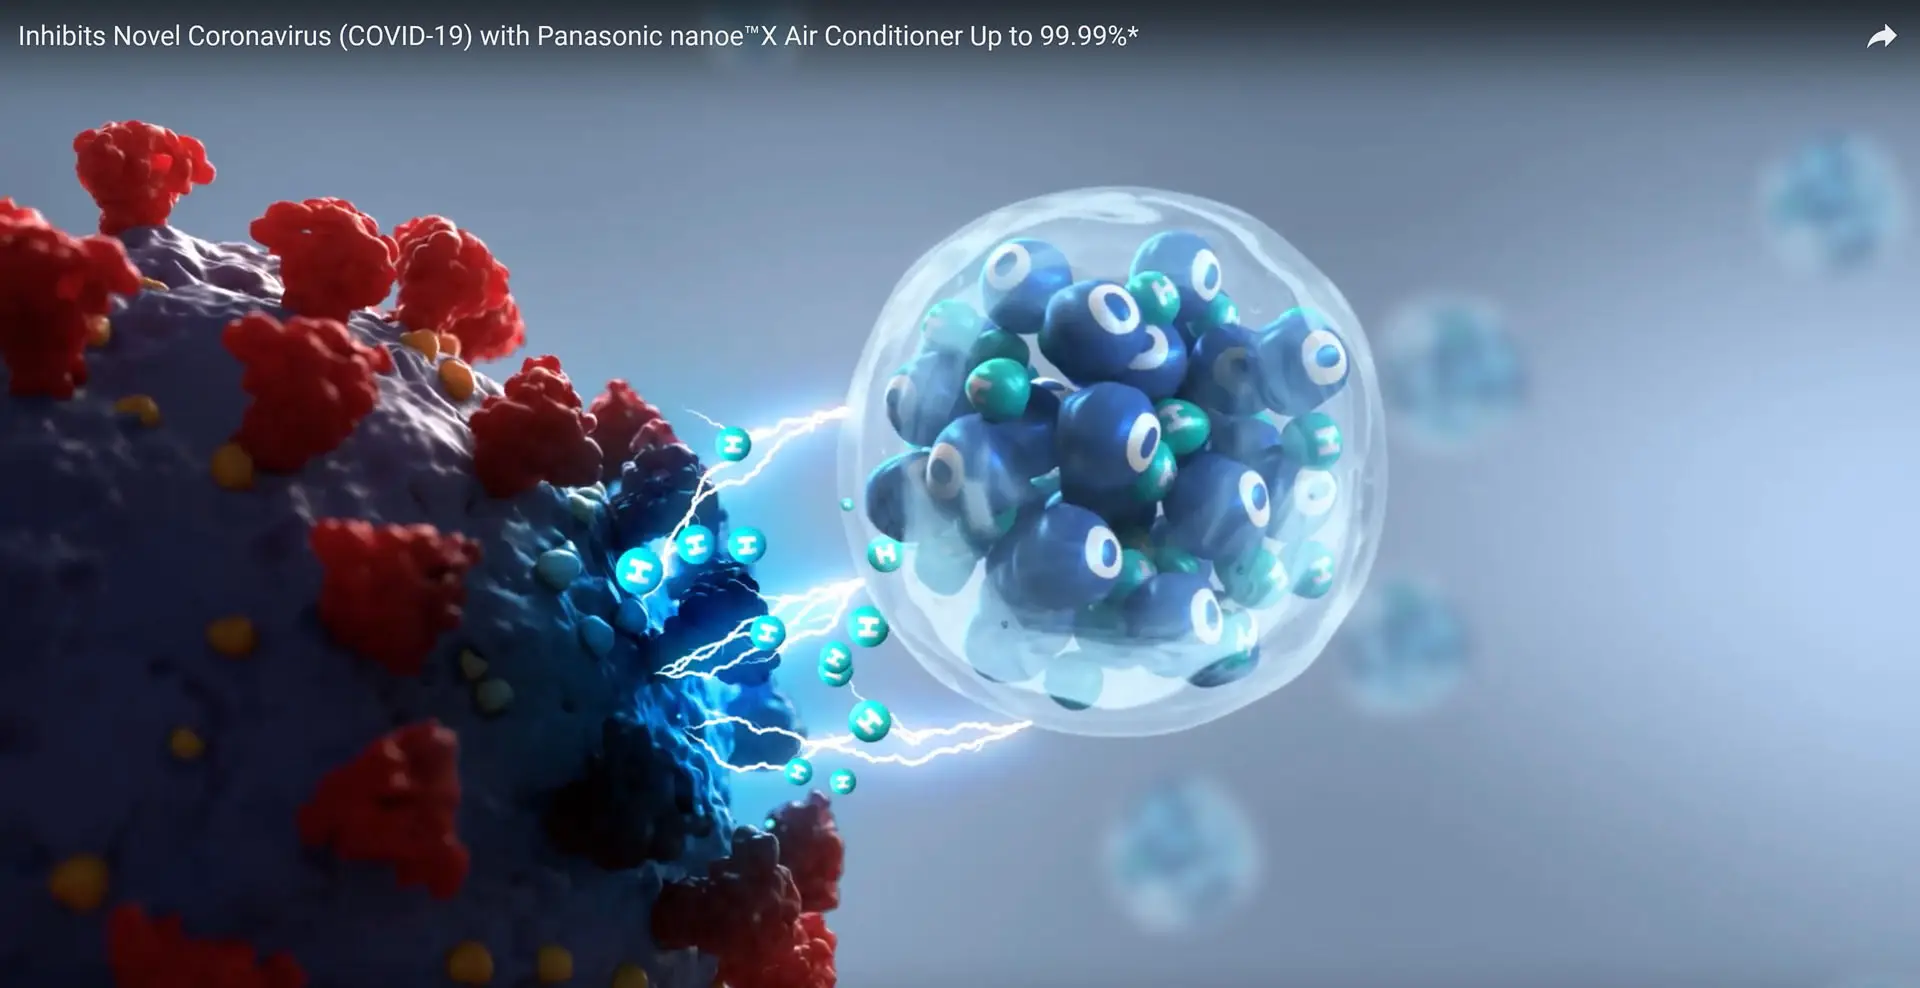 Panasonic air conditioners equipped with nanoe™ X effectively inhibit the SARS-CoV-2 virus